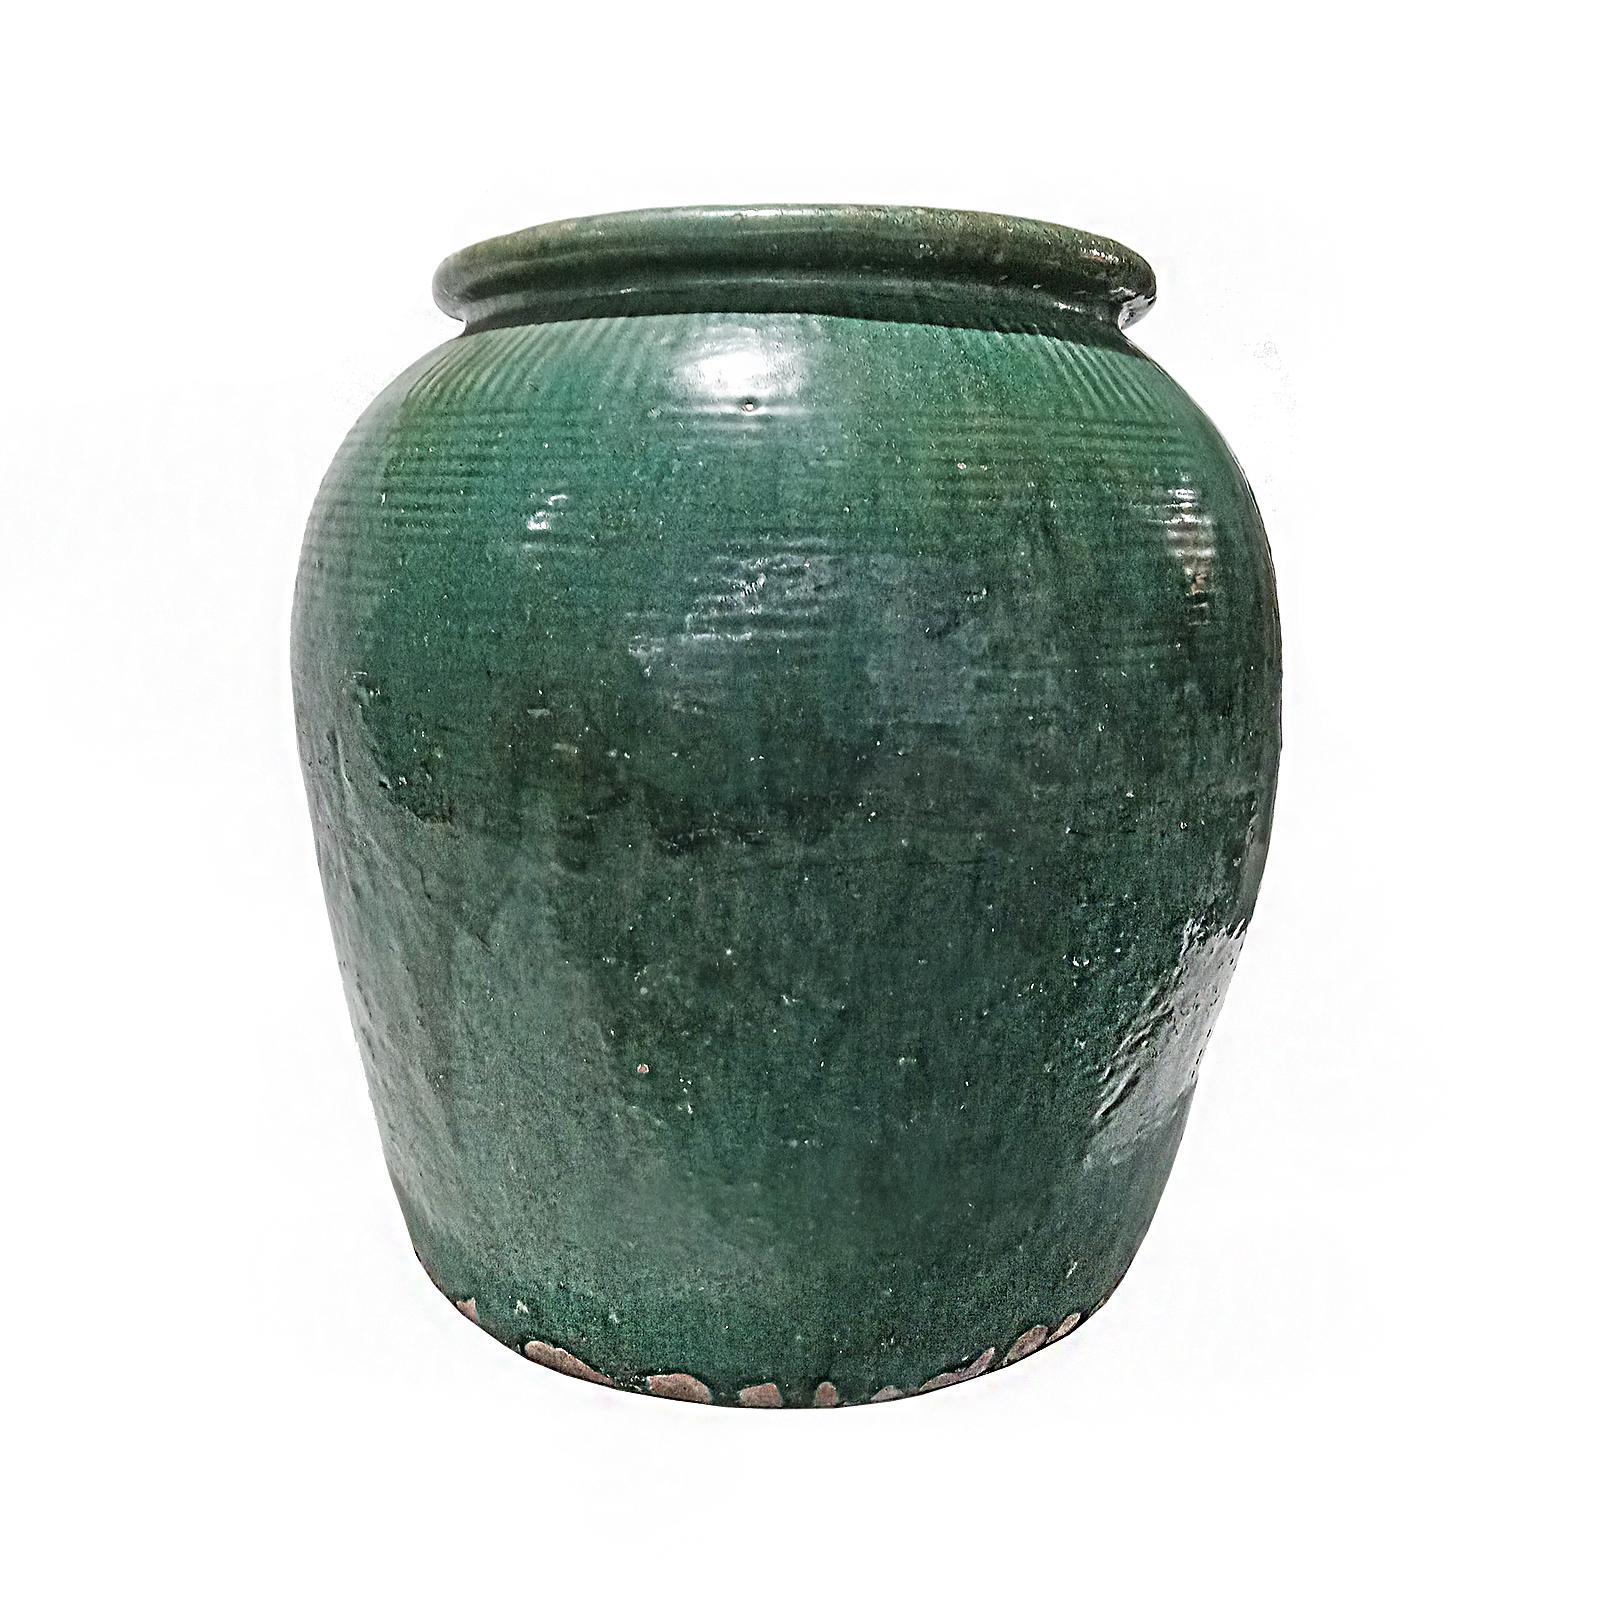 Balinese Terracotta Vase / Jar / Urn with Green Glaze, Contemporary For Sale 8